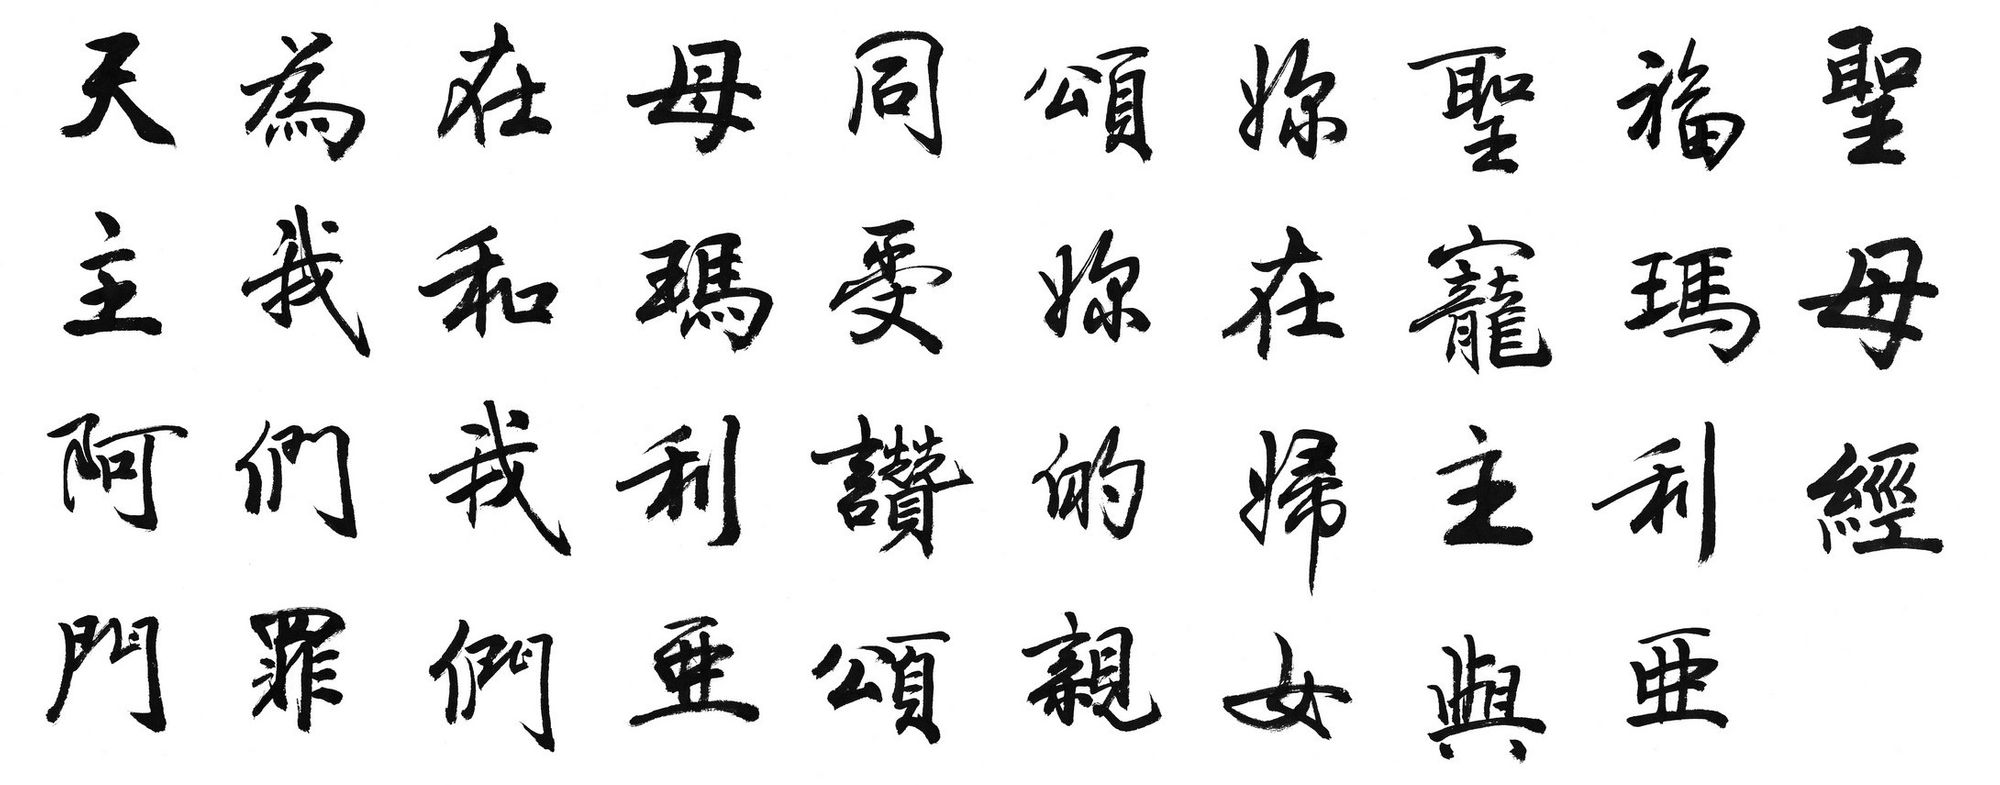 Cantonese To Chinese Translator : Language Log » "Spelling" English in Cantonese - If you need to use this translation for business, school, a tattoo, or any other official, professional, or permanent reasons, contact us first for.